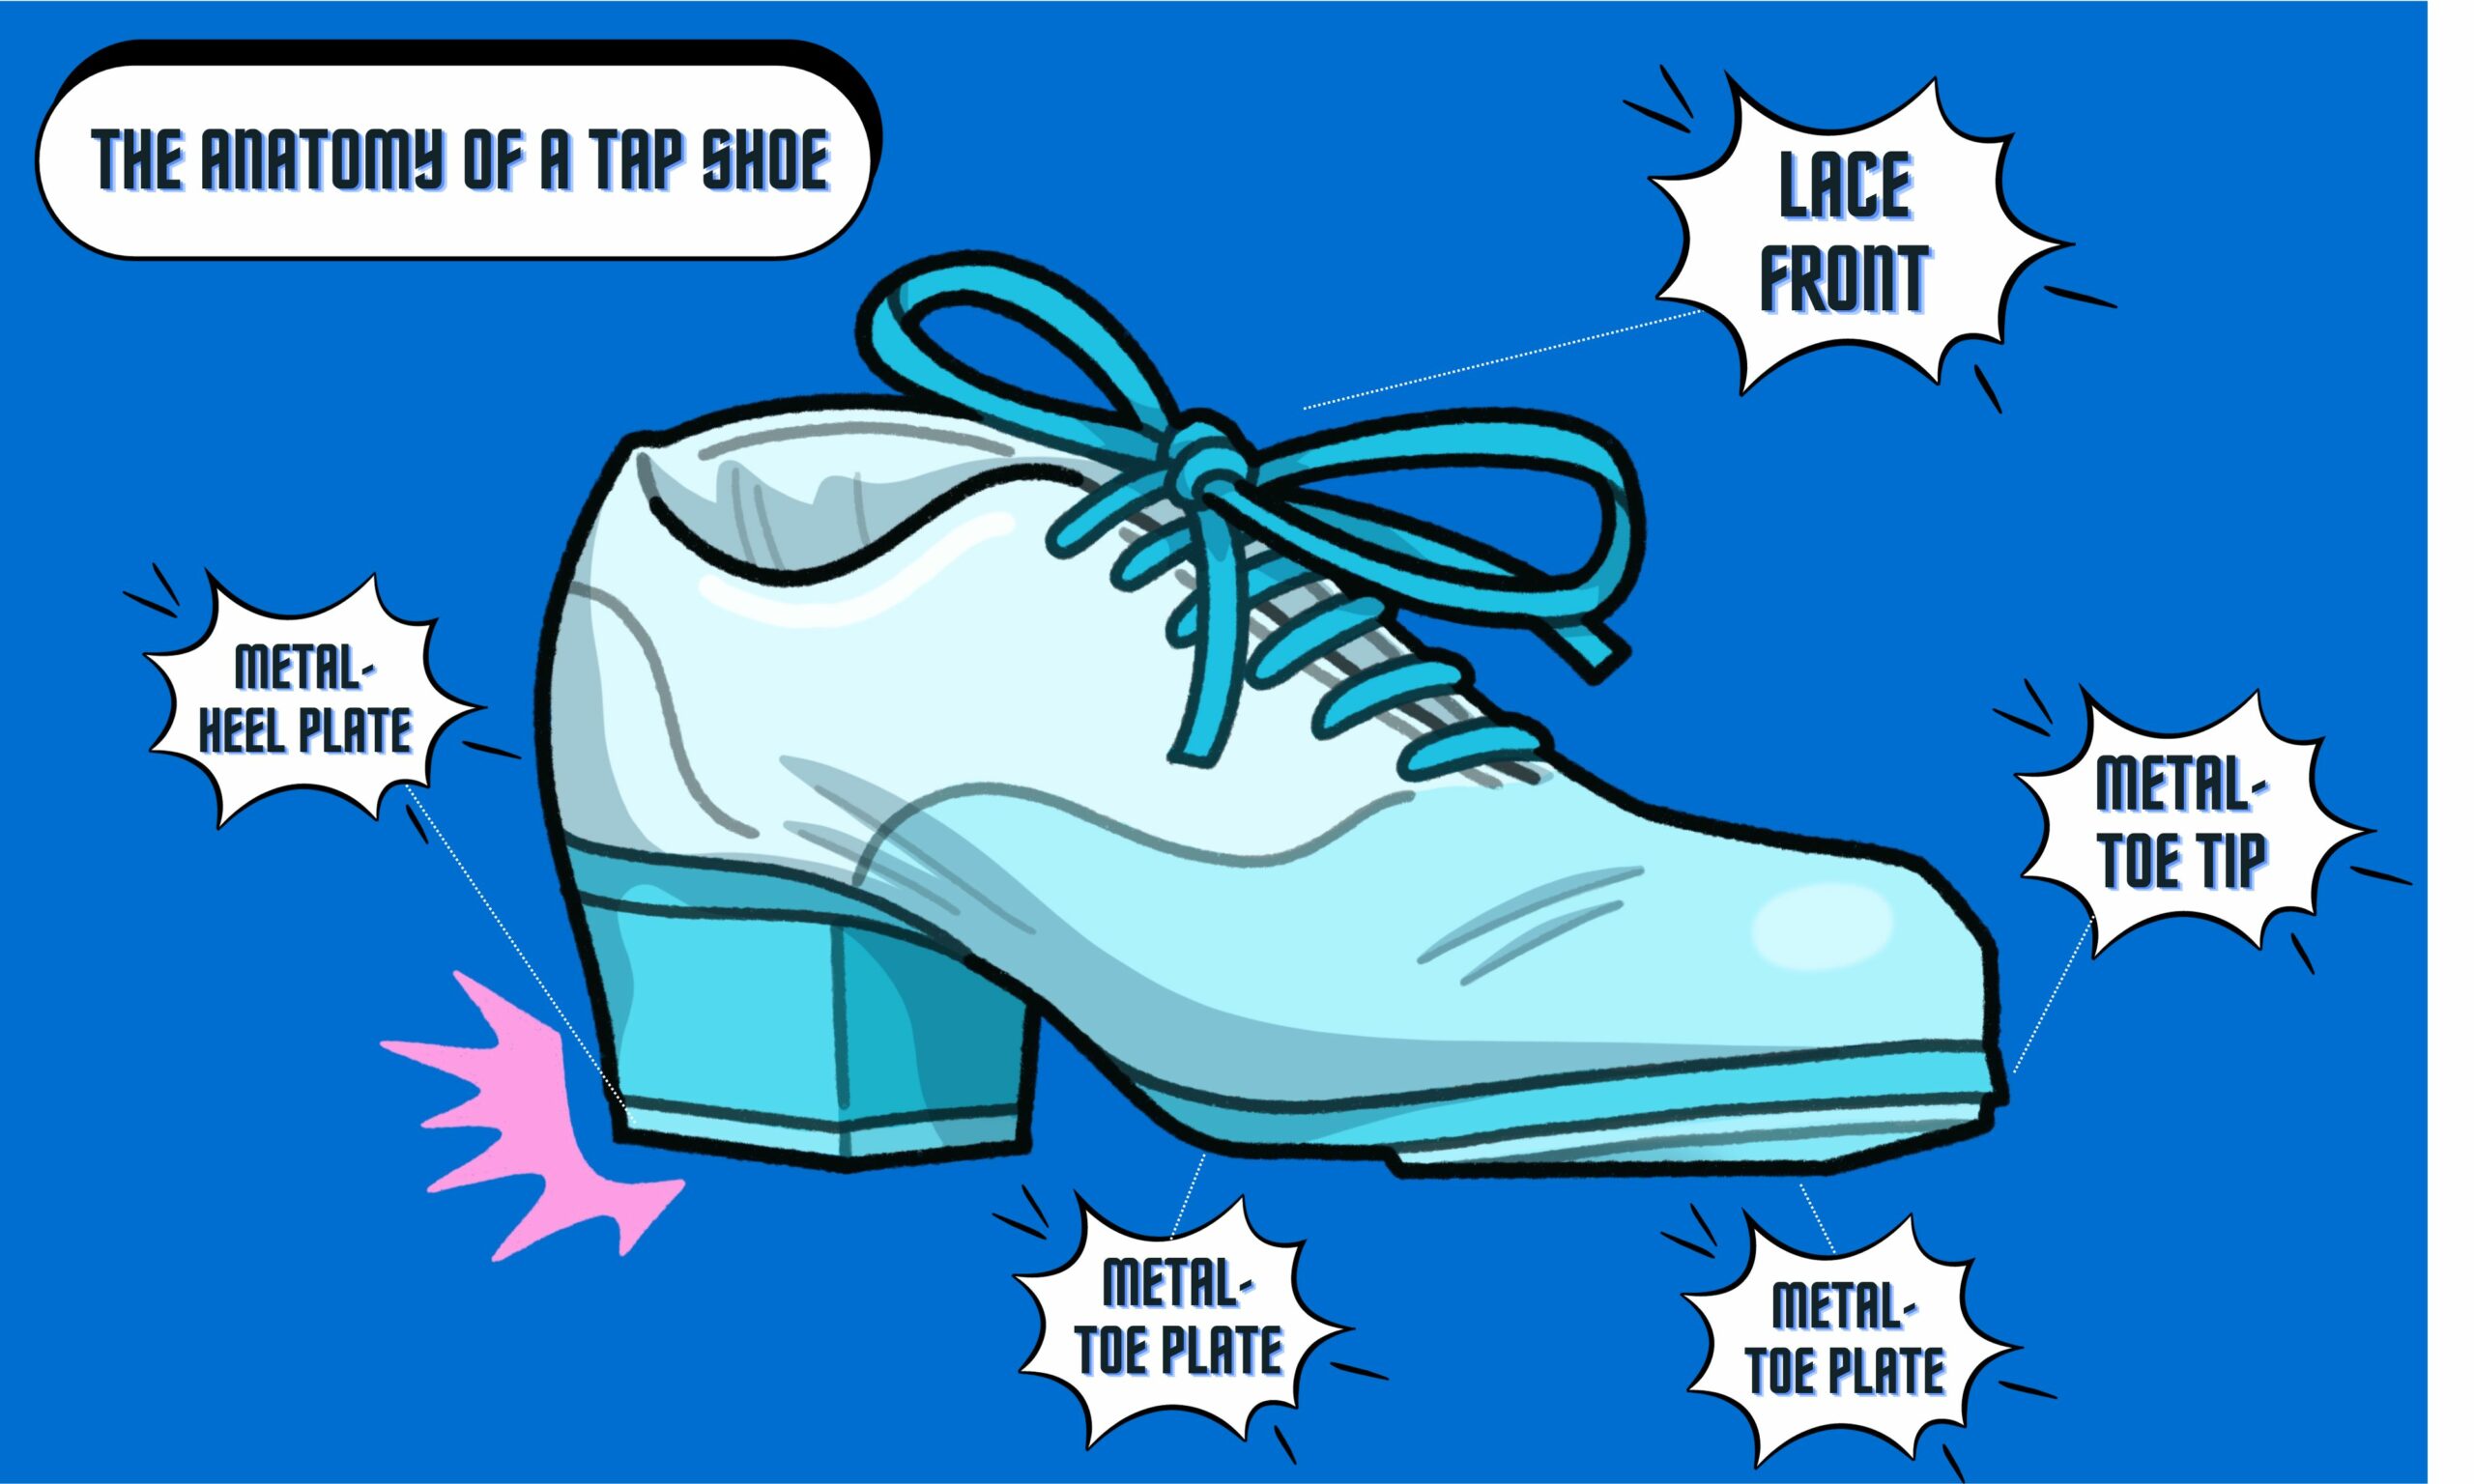 A blue and green illustration of a tap shoe and its various parts